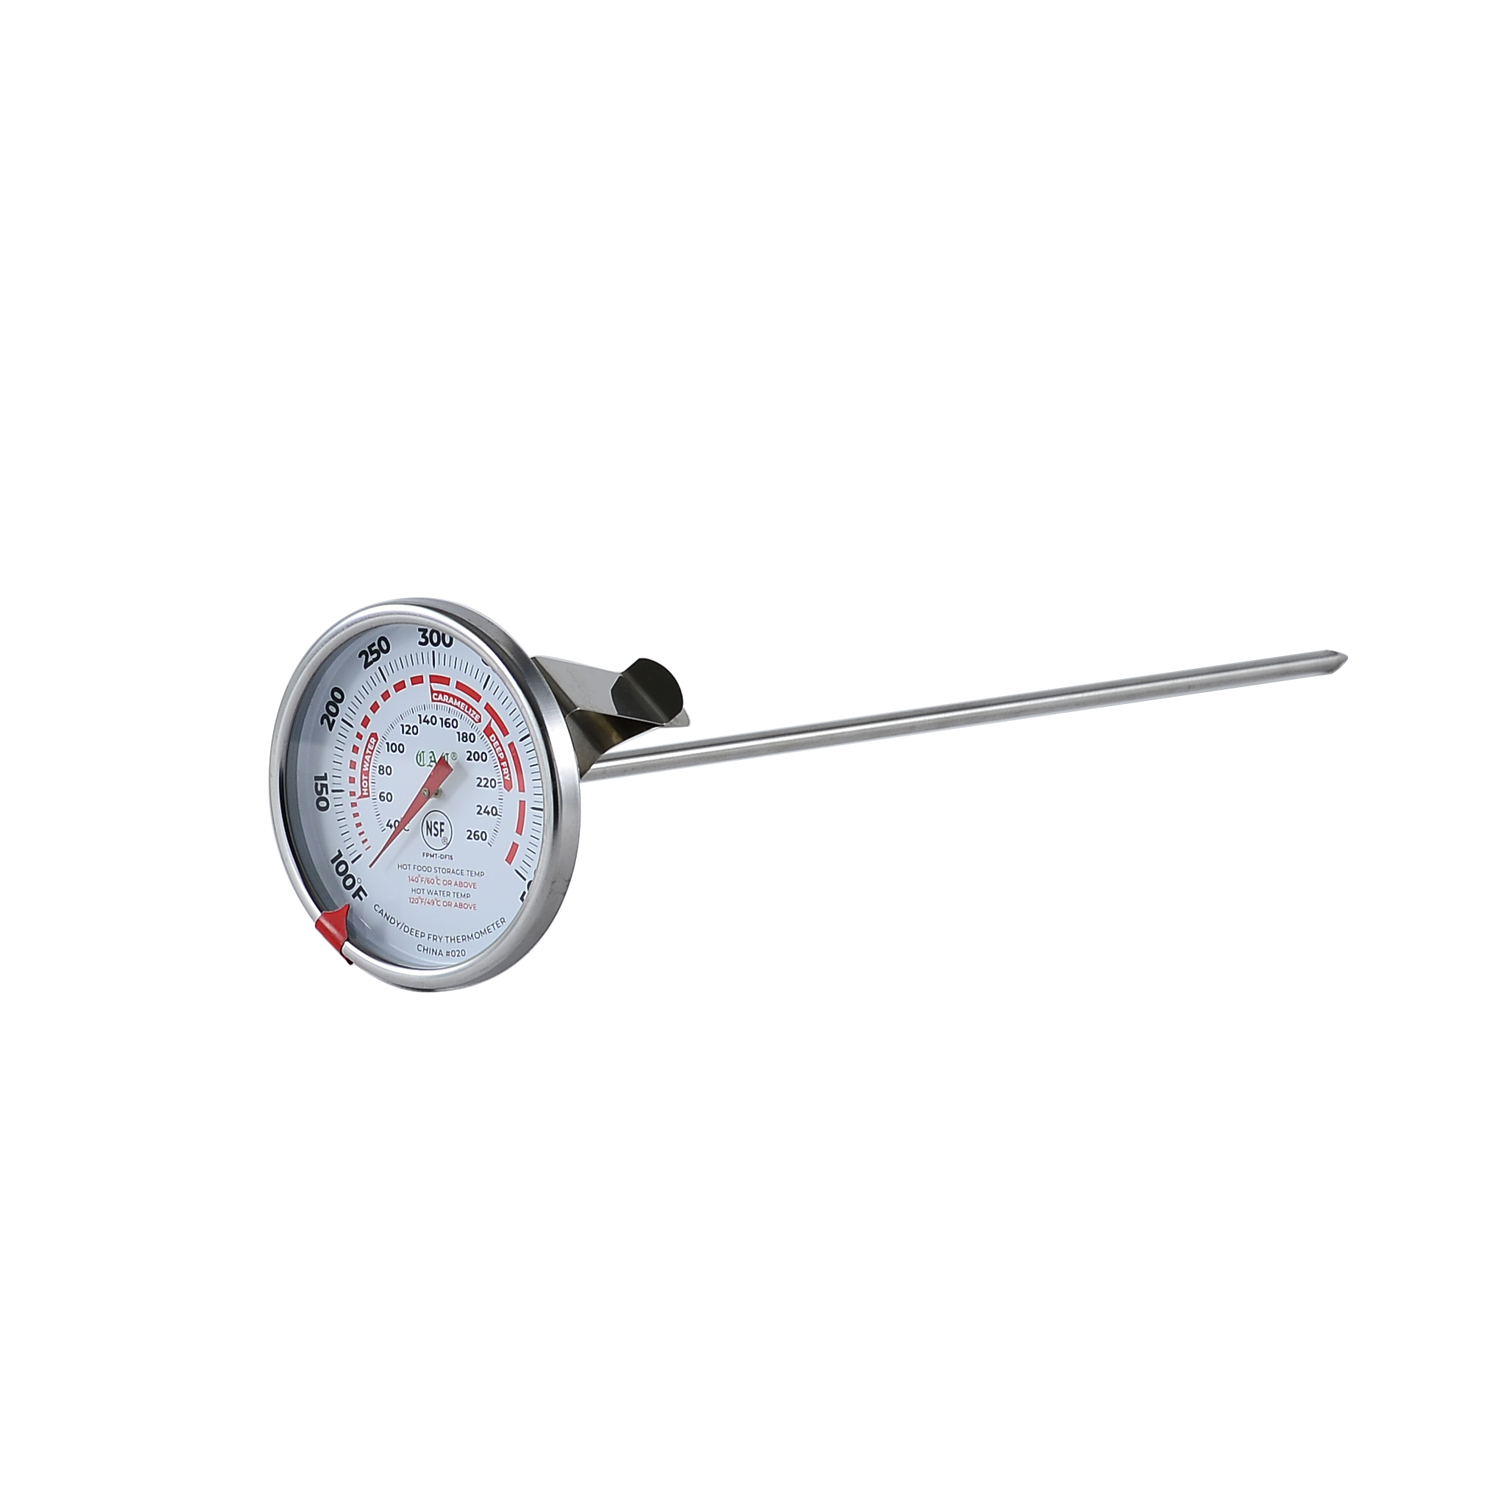 CAC China FPMT-DF15 Equil Thermo Deep Fry/Candy Thermometer, 3"Dia. x 12"L